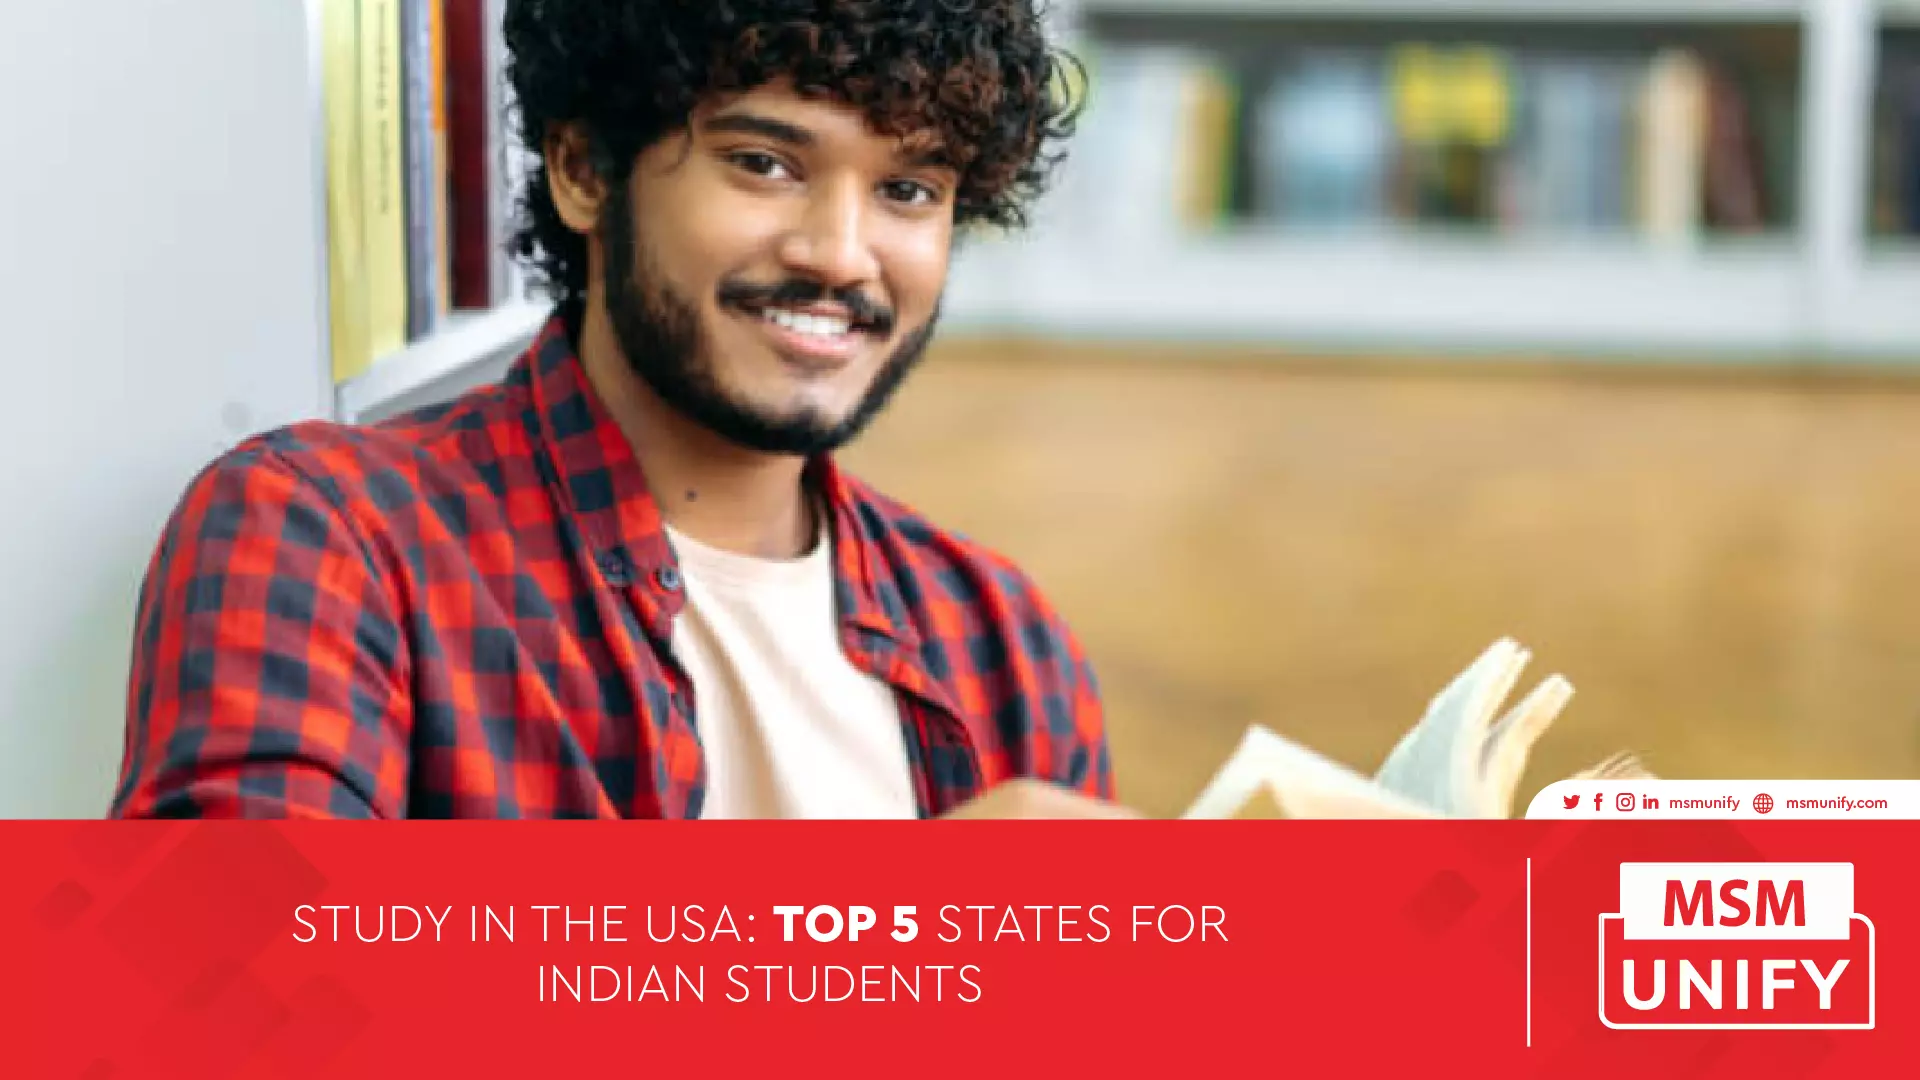 120722 MSM Unify  Study in the USA top 5 states for Indian Students 01